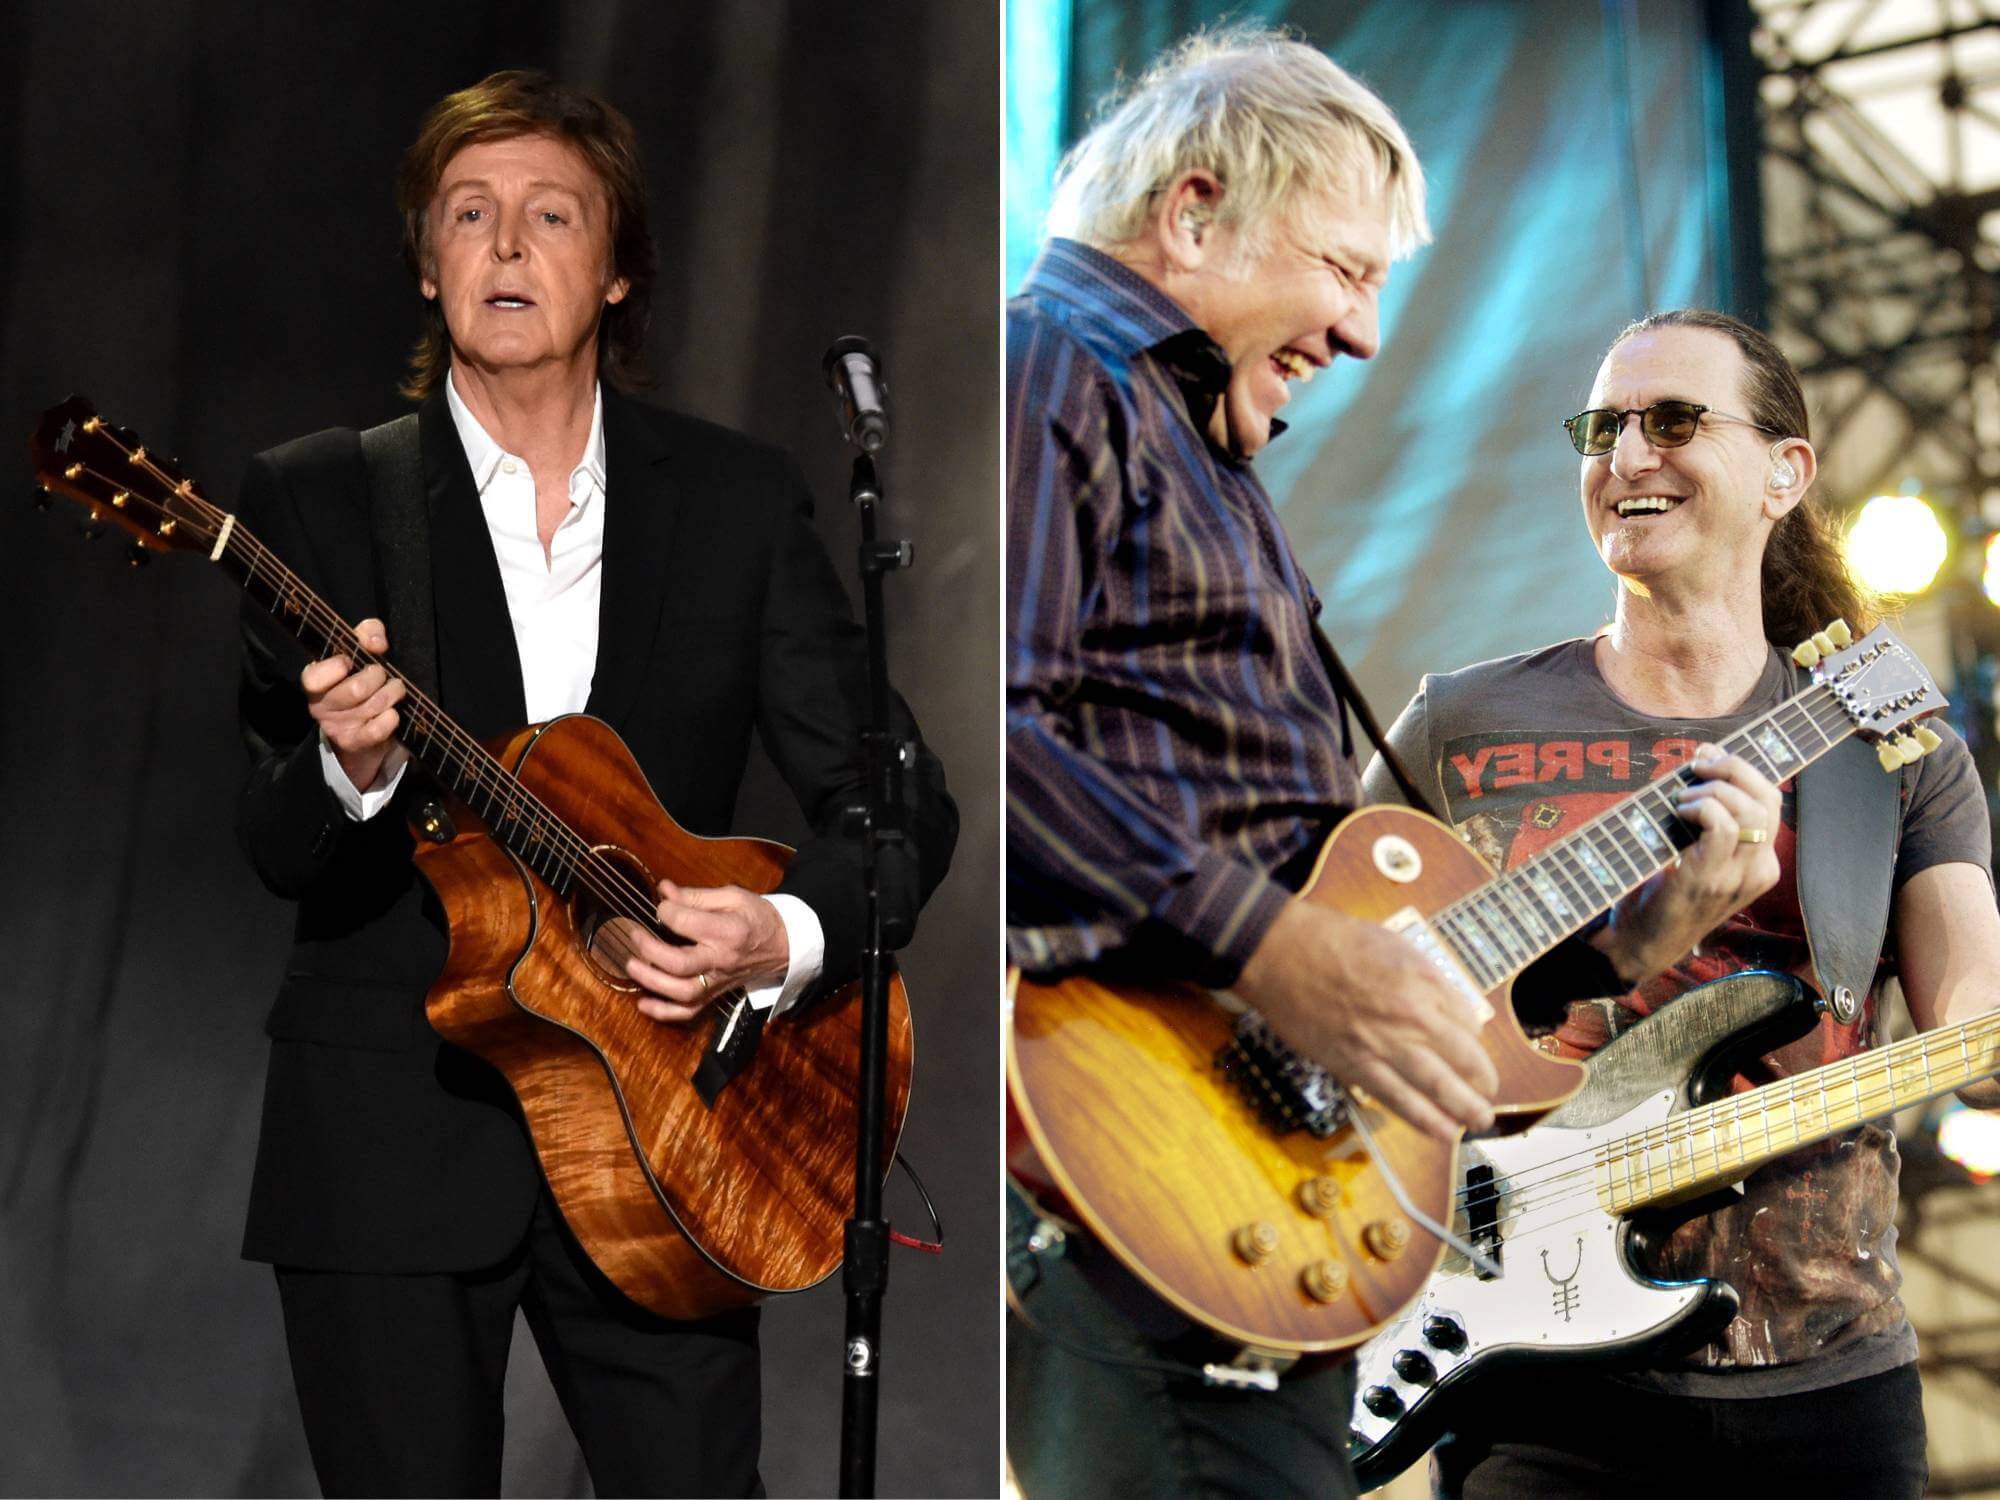 Paul McCartney and Rush's Alex Lifeson and Geddy Lee